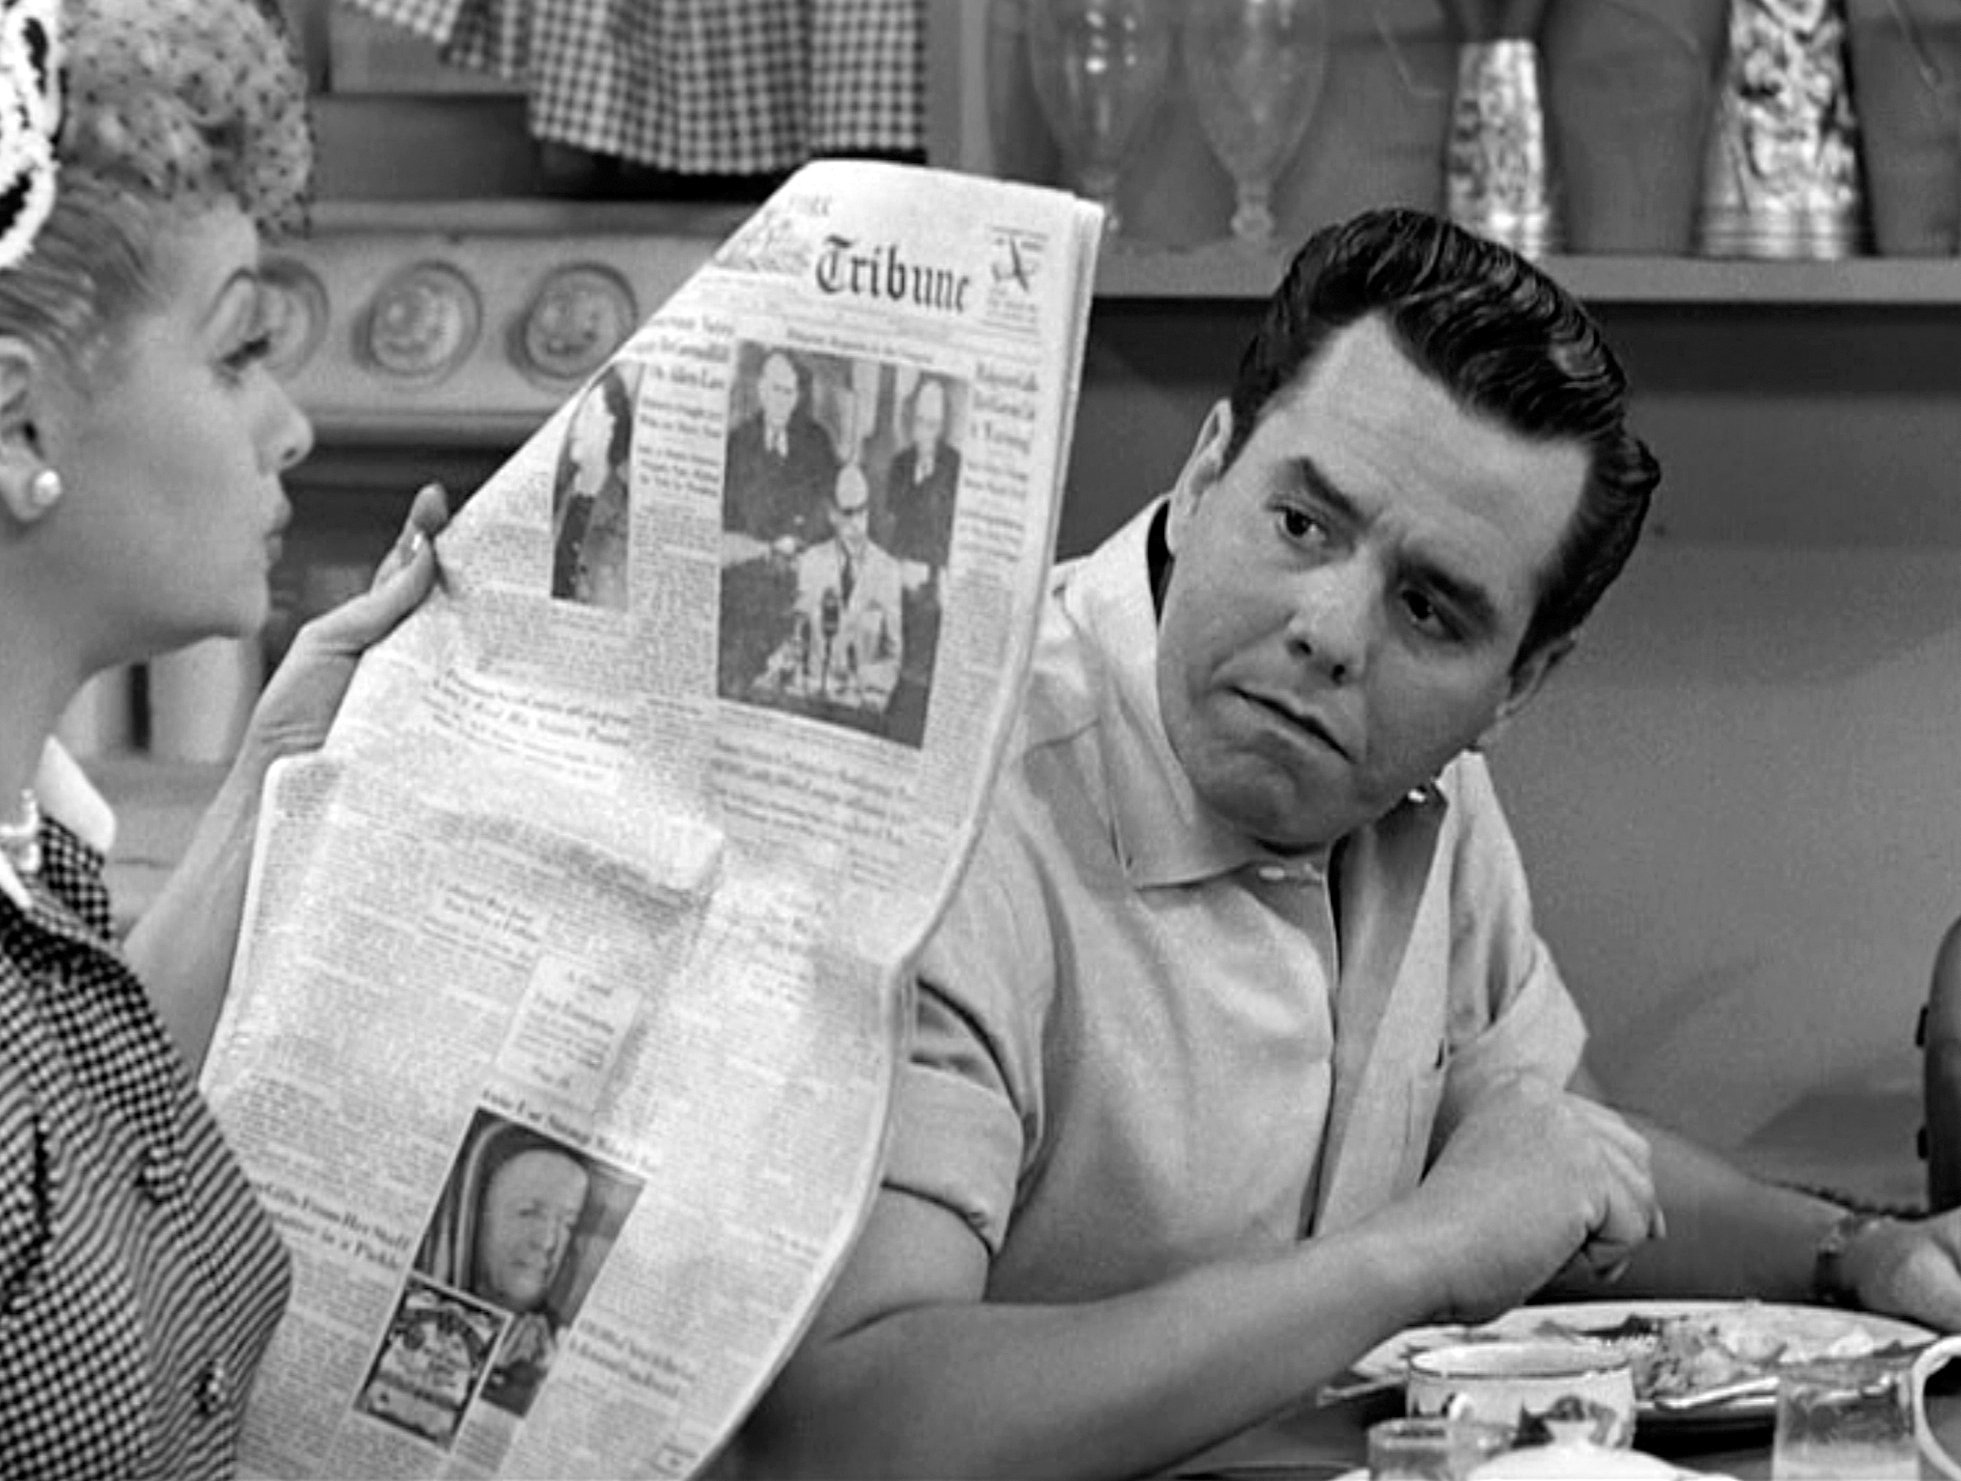 In a scene from the ‘Job Switching’ episode of 'I Love Lucy,' Lucille Ball reads a newspaper while co-star and husband Desi Arnaz looks on, 1952